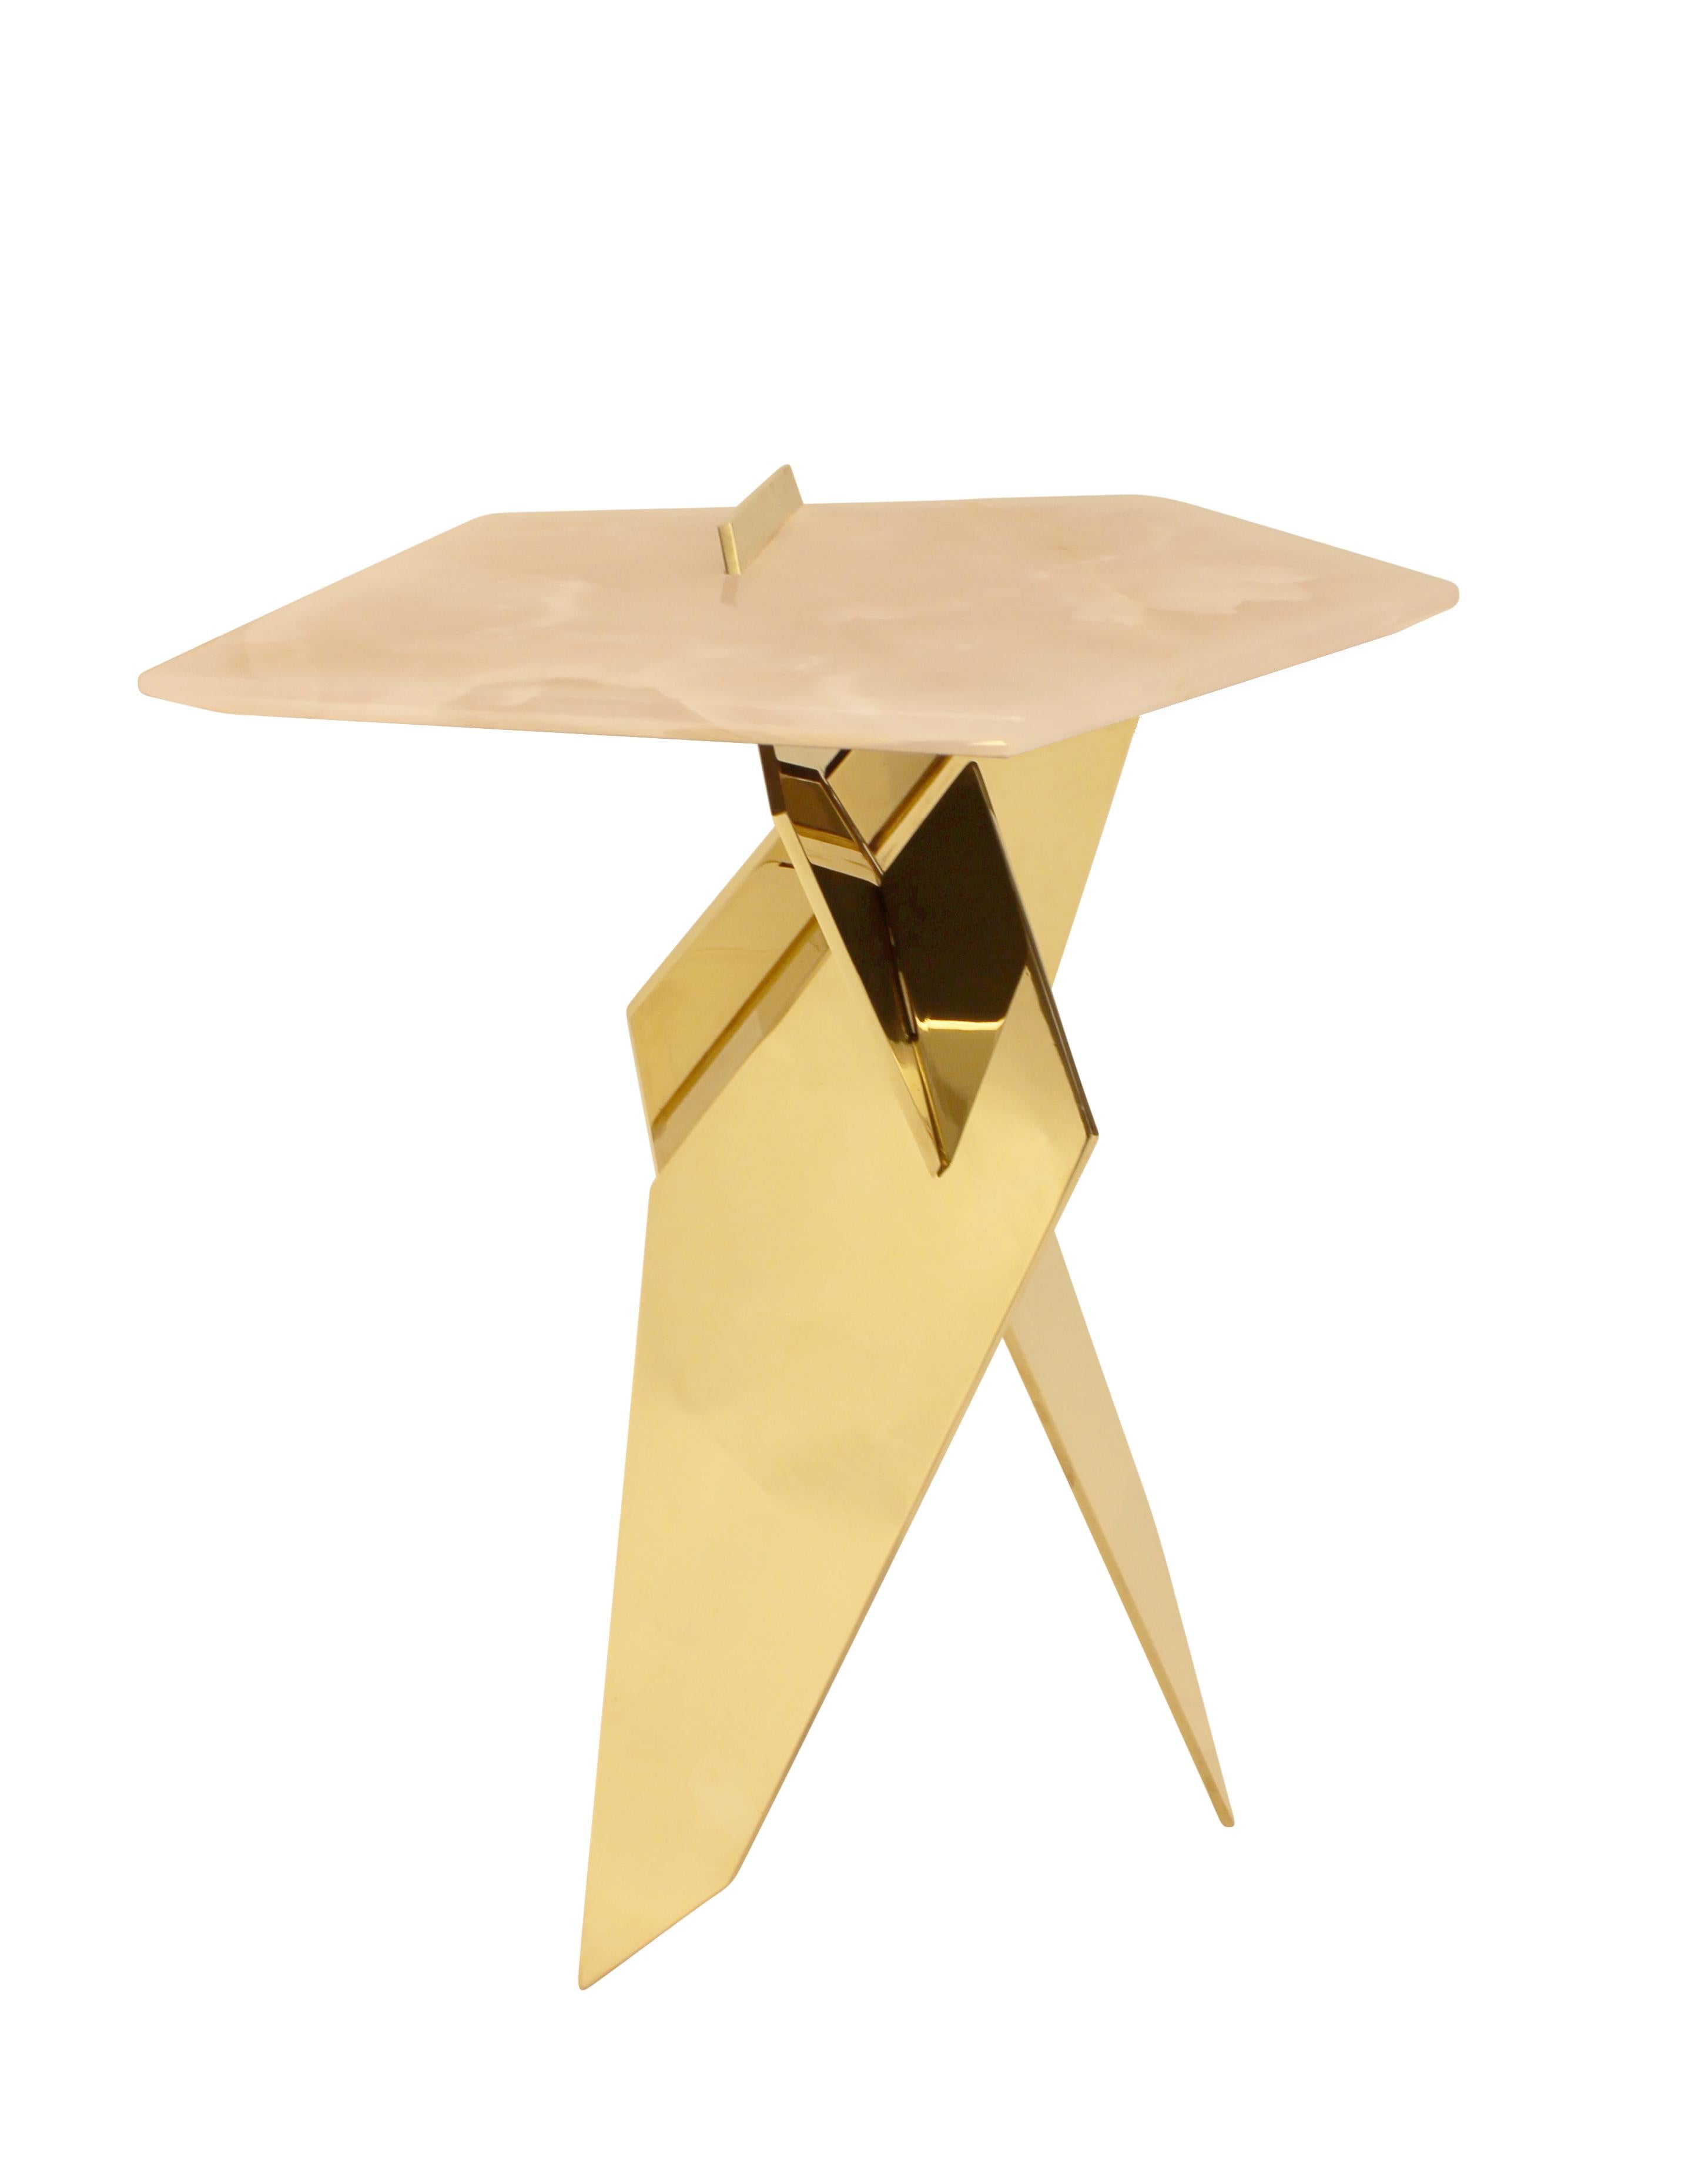 Sculptural Shard Table in Polished Bronze with Pink Onyx Top (Moderne) im Angebot